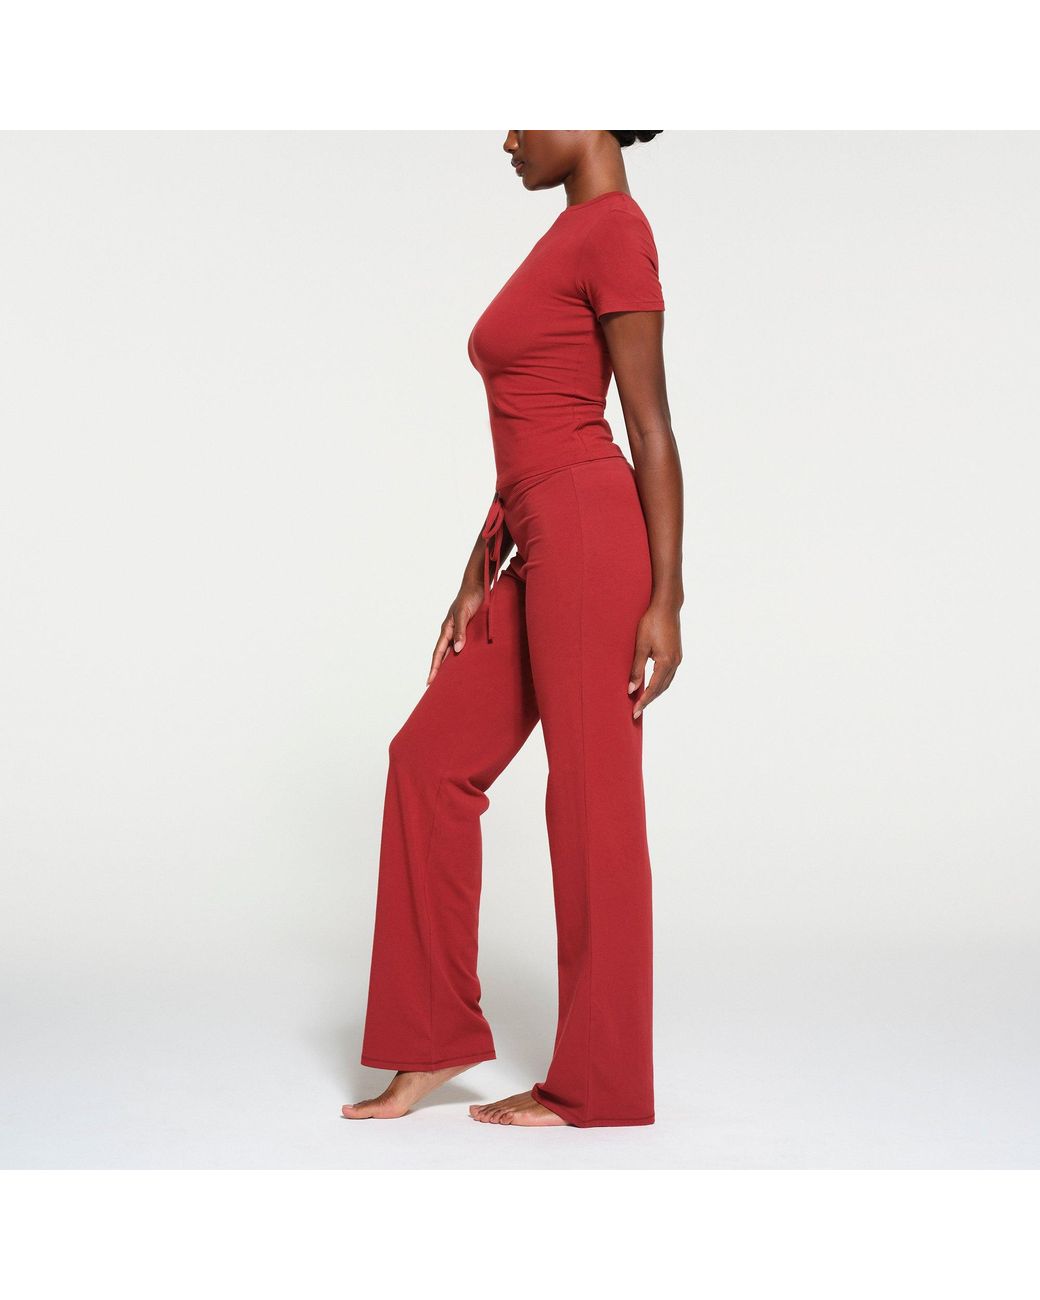 Skims Straight Leg Pant in Red